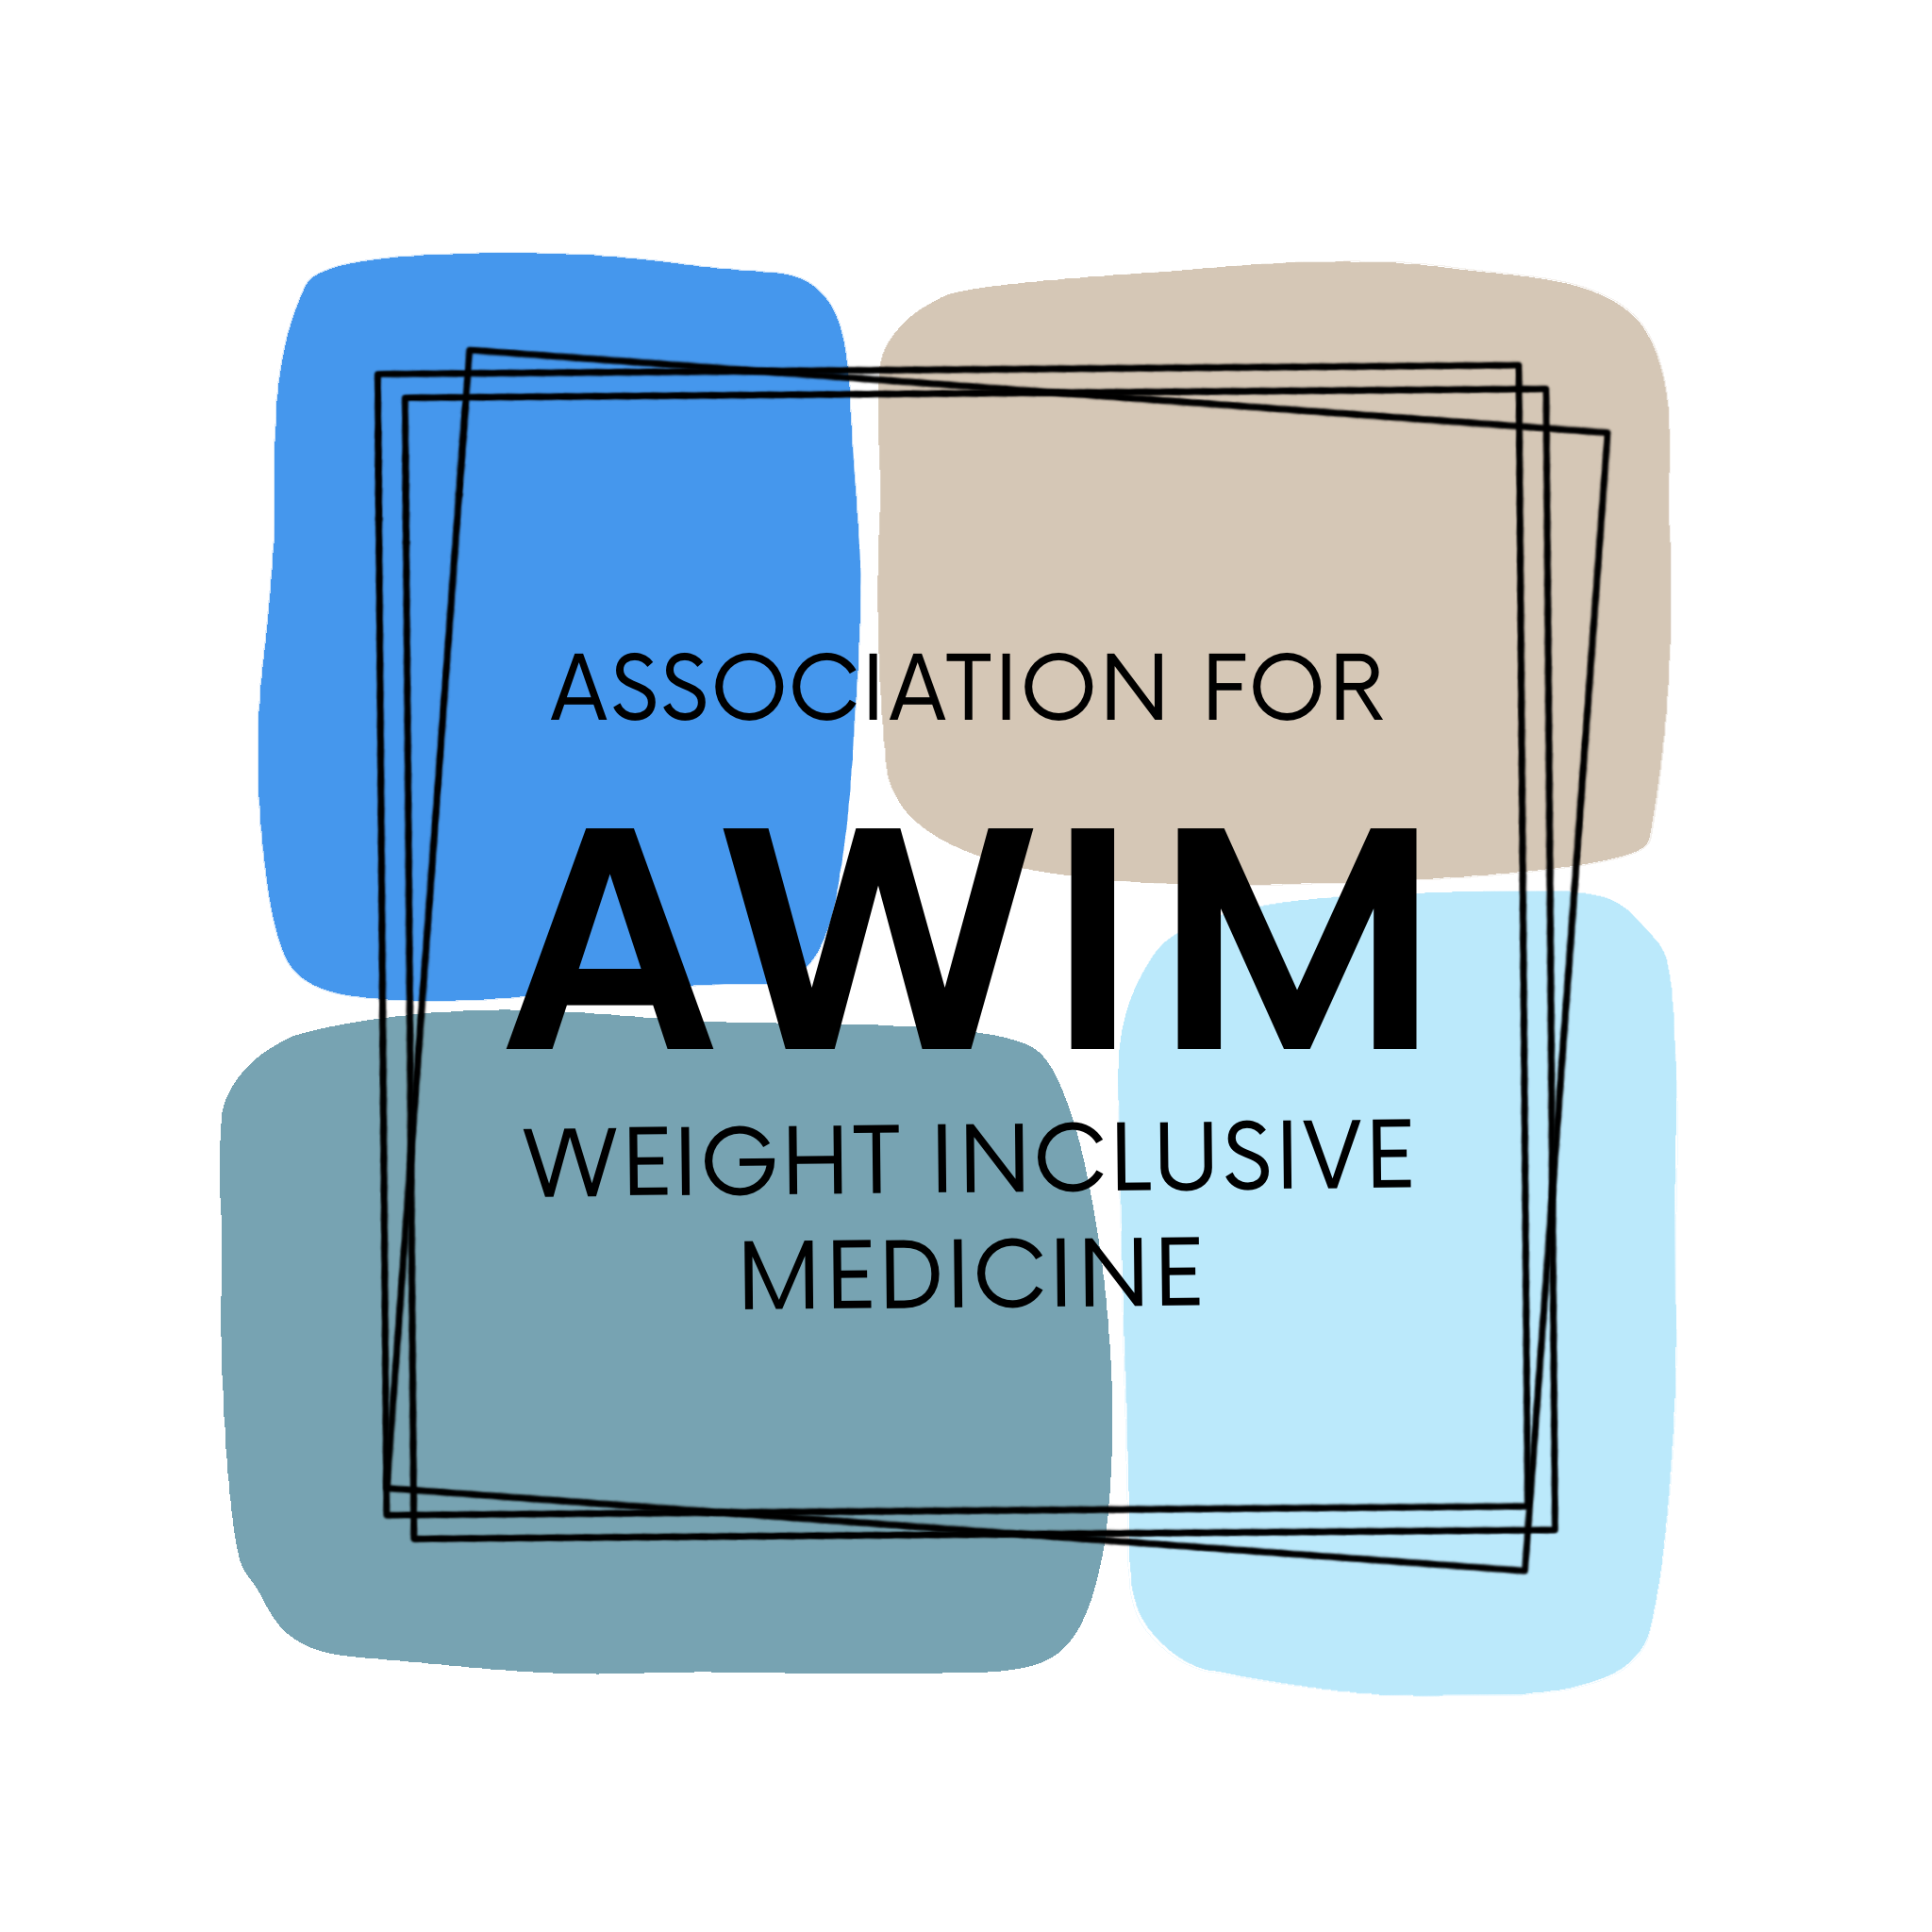 Association for Weight Inclusive Medicine